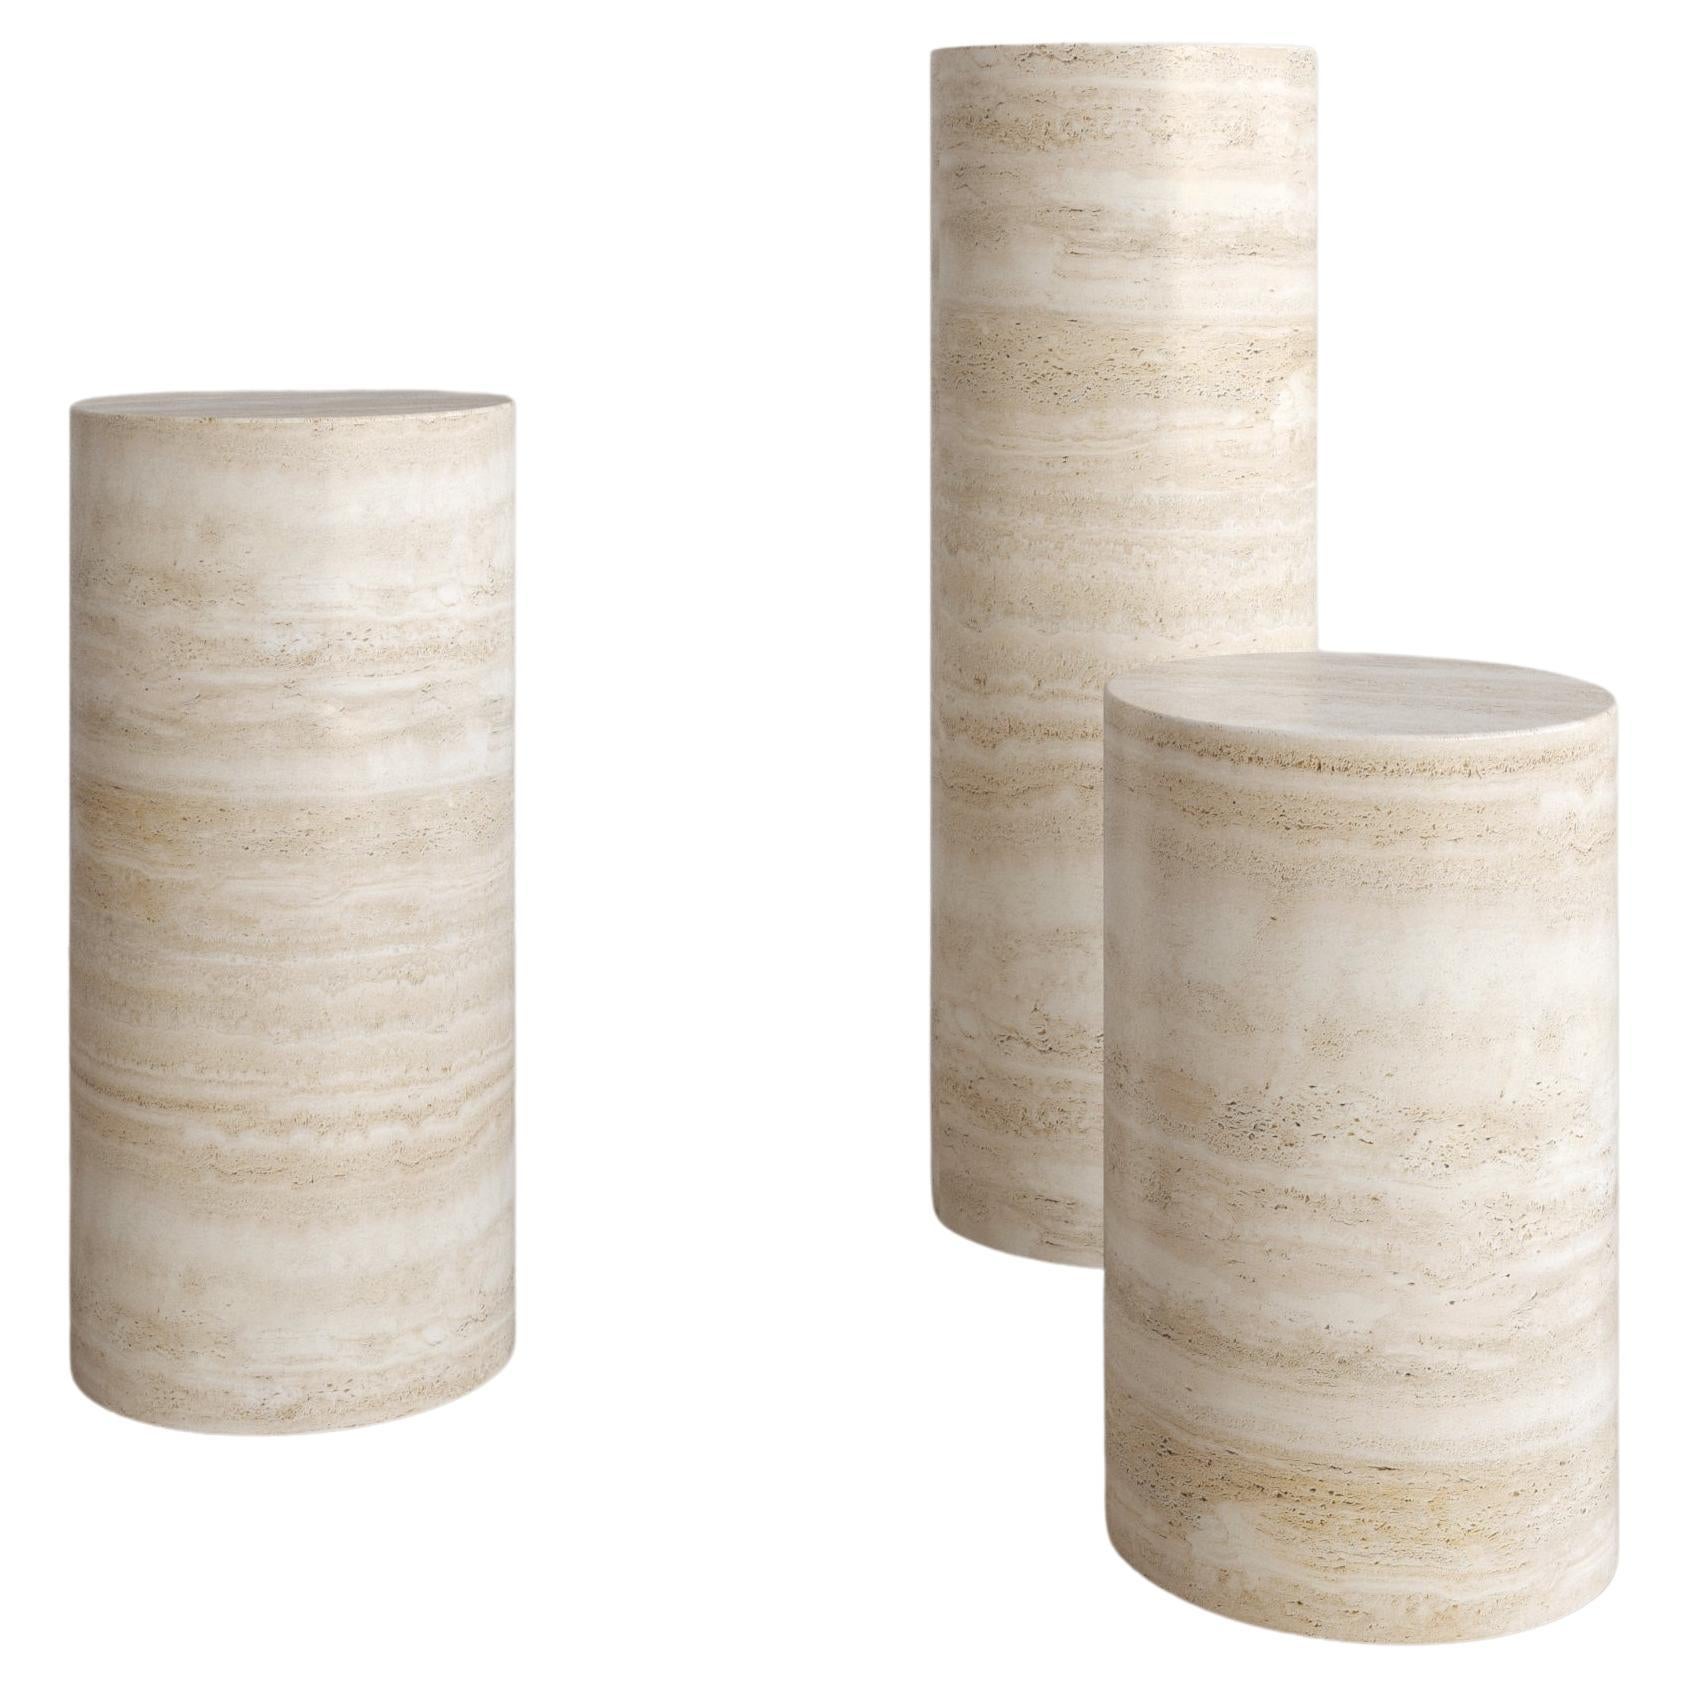 650mm Nude Travertine Voyage Pedestal by the Essentialist For Sale